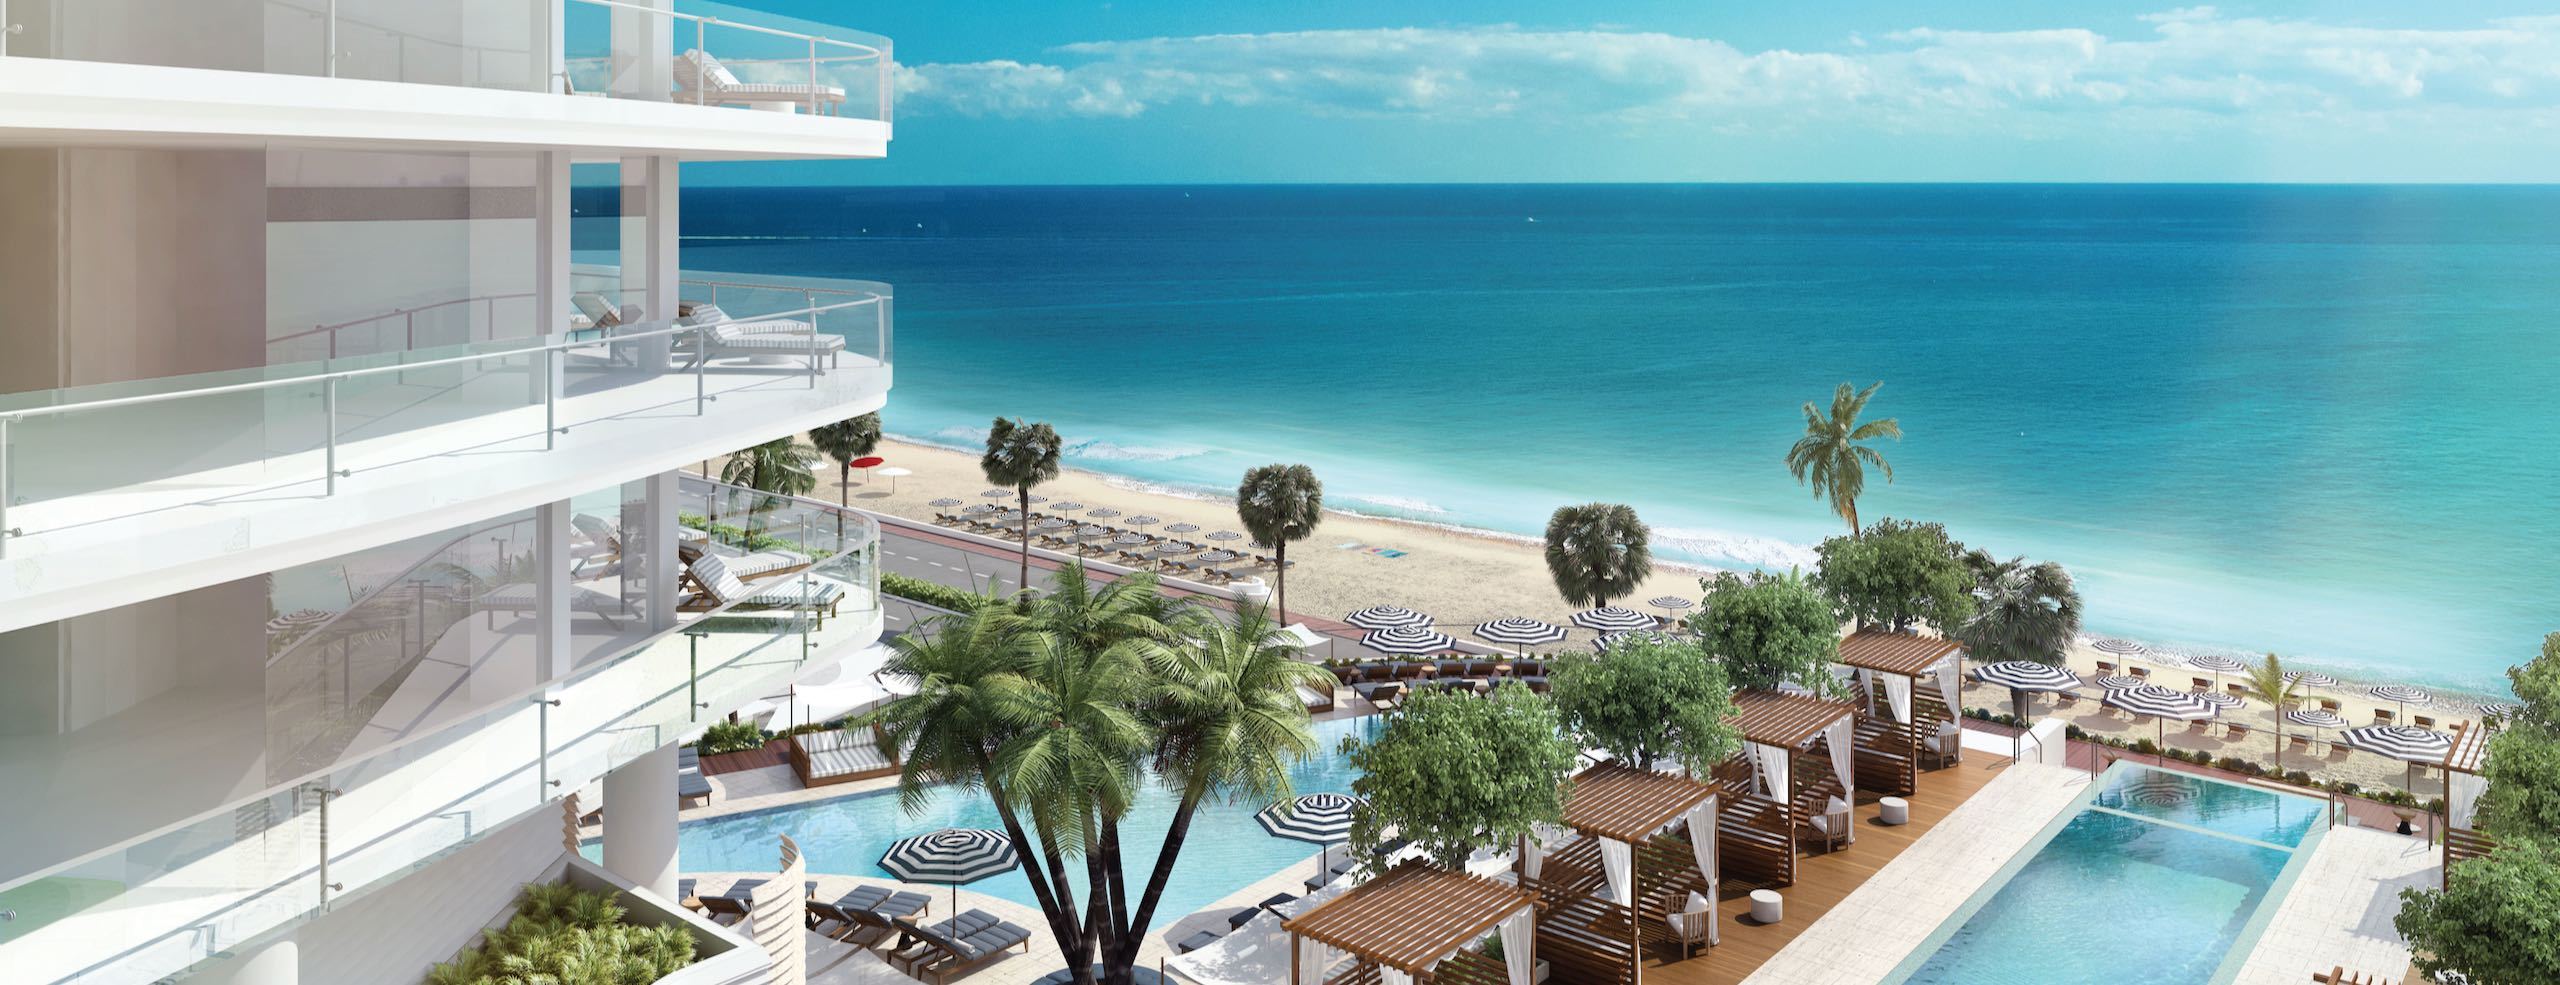 Four Seasons Private Residences Ft Lauderdale | 525 N Fort Lauderdale Beach Blvd, Fort Lauderdale, FL 33304